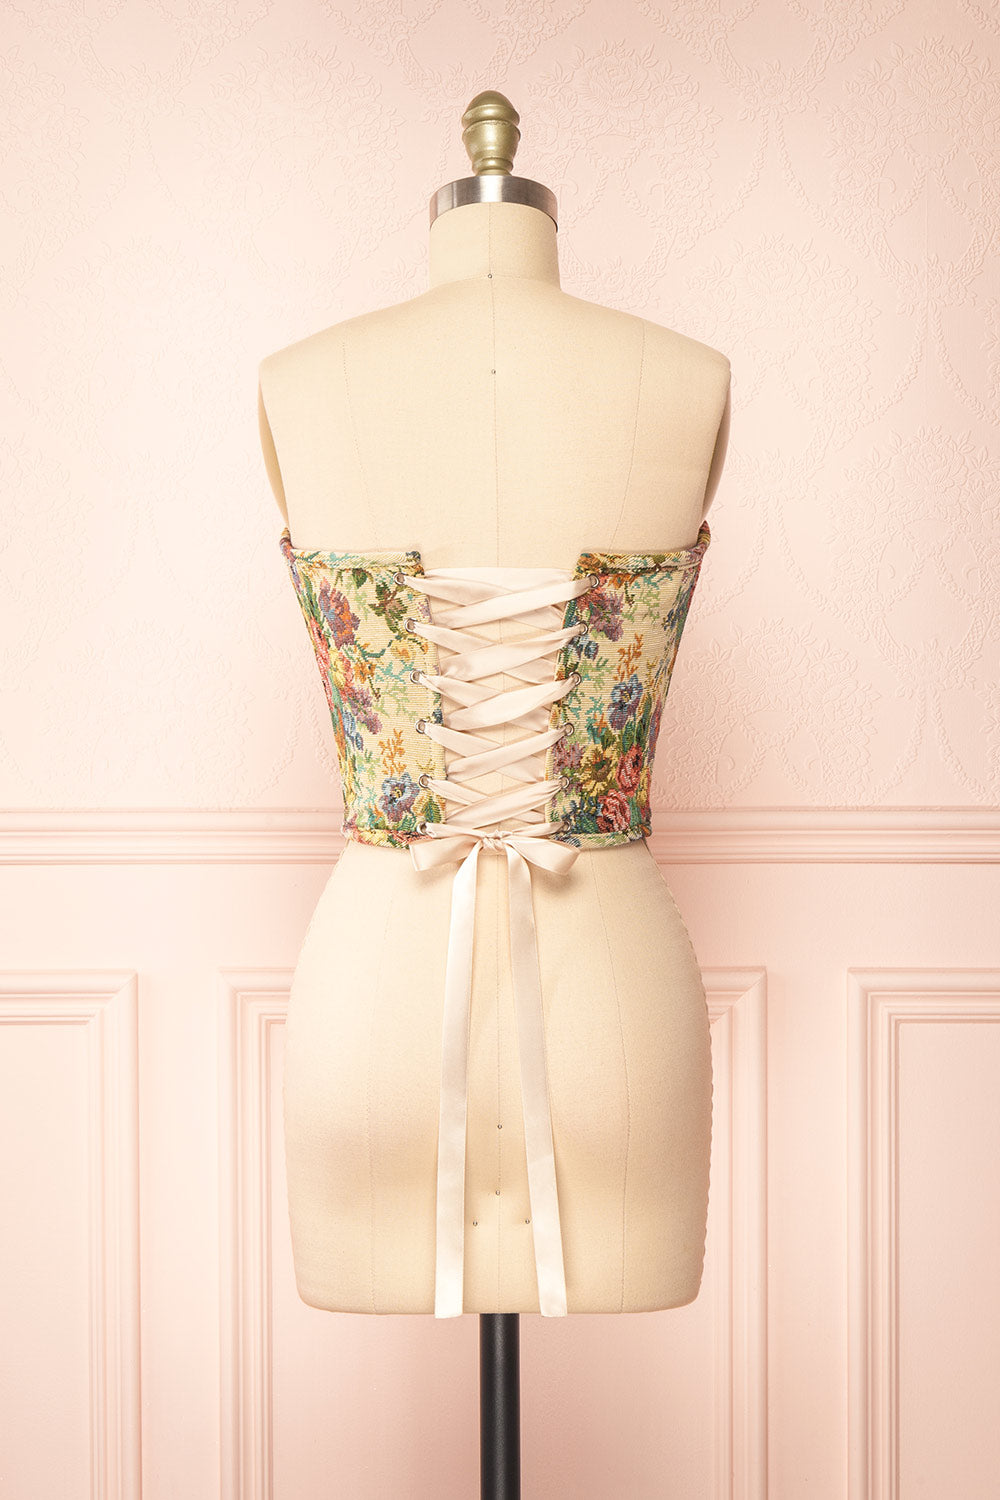 Cocona Beige Bustier Corset Top w/ Lace Up Back